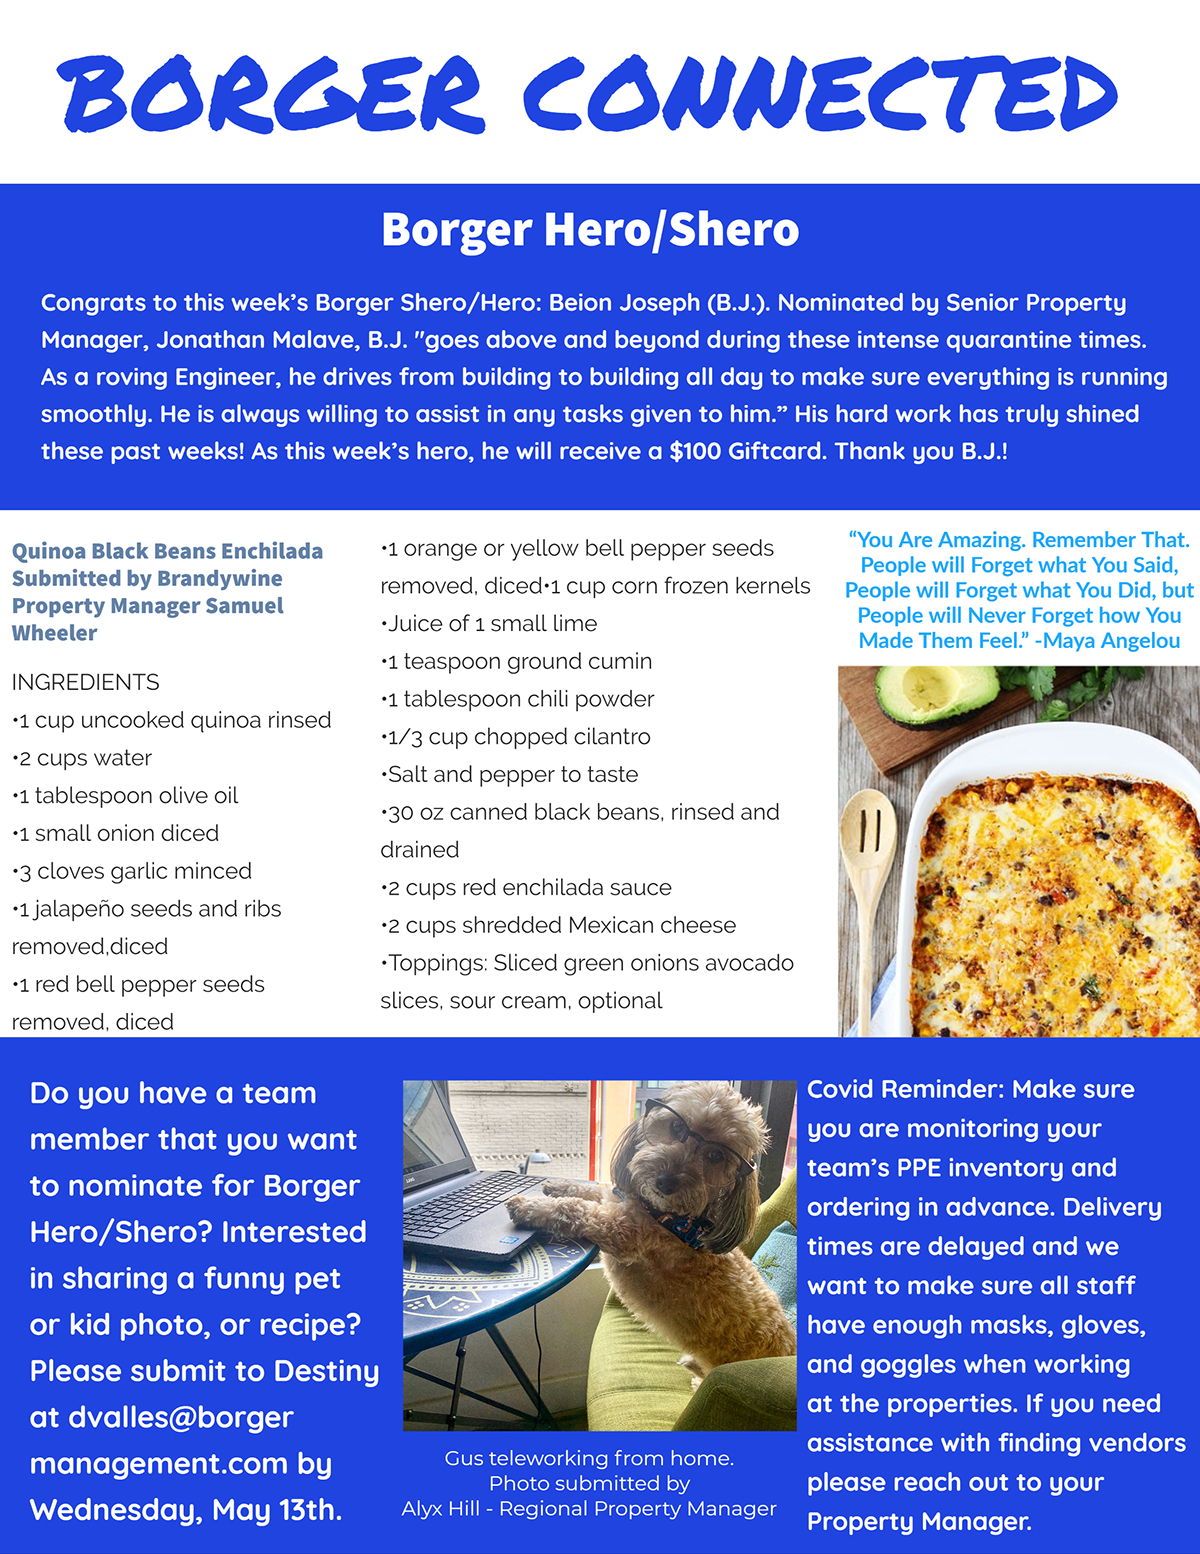 Borger Connected Borger Connected Borger Hero/Shero Do you have a team member that you want to nominate for Borger Hero/Shero? Interested in sharing a funny pet or kid photo, or recipe? Please submit to Destiny at dvalles@borger management.com by Wednesday, May 13th. Covid Reminder: Make sure you are monitoring your team’s PPE inventory and ordering in advance. Delivery times are delayed and we want to make sure all staff have enough masks, gloves, and goggles when working at the properties. If you need assistance with finding vendors please reach out to your Property Manager. Congrats to this week’s Borger Shero/Hero: Beion Joseph (B.J.). Nominated by Senior Property Manager, Jonathan Malave, B.J. "goes above and beyond during these intense quarantine times. As a roving Engineer, he drives from building to building all day to make sure everything is running smoothly. He is always willing to assist in any tasks given to him.” His hard work has truly shined these past weeks! As this week’s hero, he will receive a $100 Giftcard. Thank you B.J.! •1 orange or yellow bell pepper seeds removed, diced•1 cup corn frozen kernels •Juice of 1 small lime •1 teaspoon ground cumin •1 tablespoon chili powder •1/3 cup chopped cilantro •Salt and pepper to taste •30 oz canned black beans, rinsed and drained •2 cups red enchilada sauce •2 cups shredded Mexican cheese •Toppings: Sliced green onions avocado slices, sour cream, optional Quinoa Black Beans Enchilada Submitted by Brandywine Property Manager Samuel Wheeler INGREDIENTS •1 cup uncooked quinoa rinsed •2 cups water •1 tablespoon olive oil •1 small onion diced •3 cloves garlic minced •1 jalapeño seeds and ribs removed,diced •1 red bell pepper seeds removed, diced “You Are Amazing. Remember That. People will Forget what You Said, People will Forget what You Did, but People will Never Forget how You Made Them Feel.” -Maya Angelou Gus teleworking from home. Photo submitted by Alyx Hill - Regional Property Manager